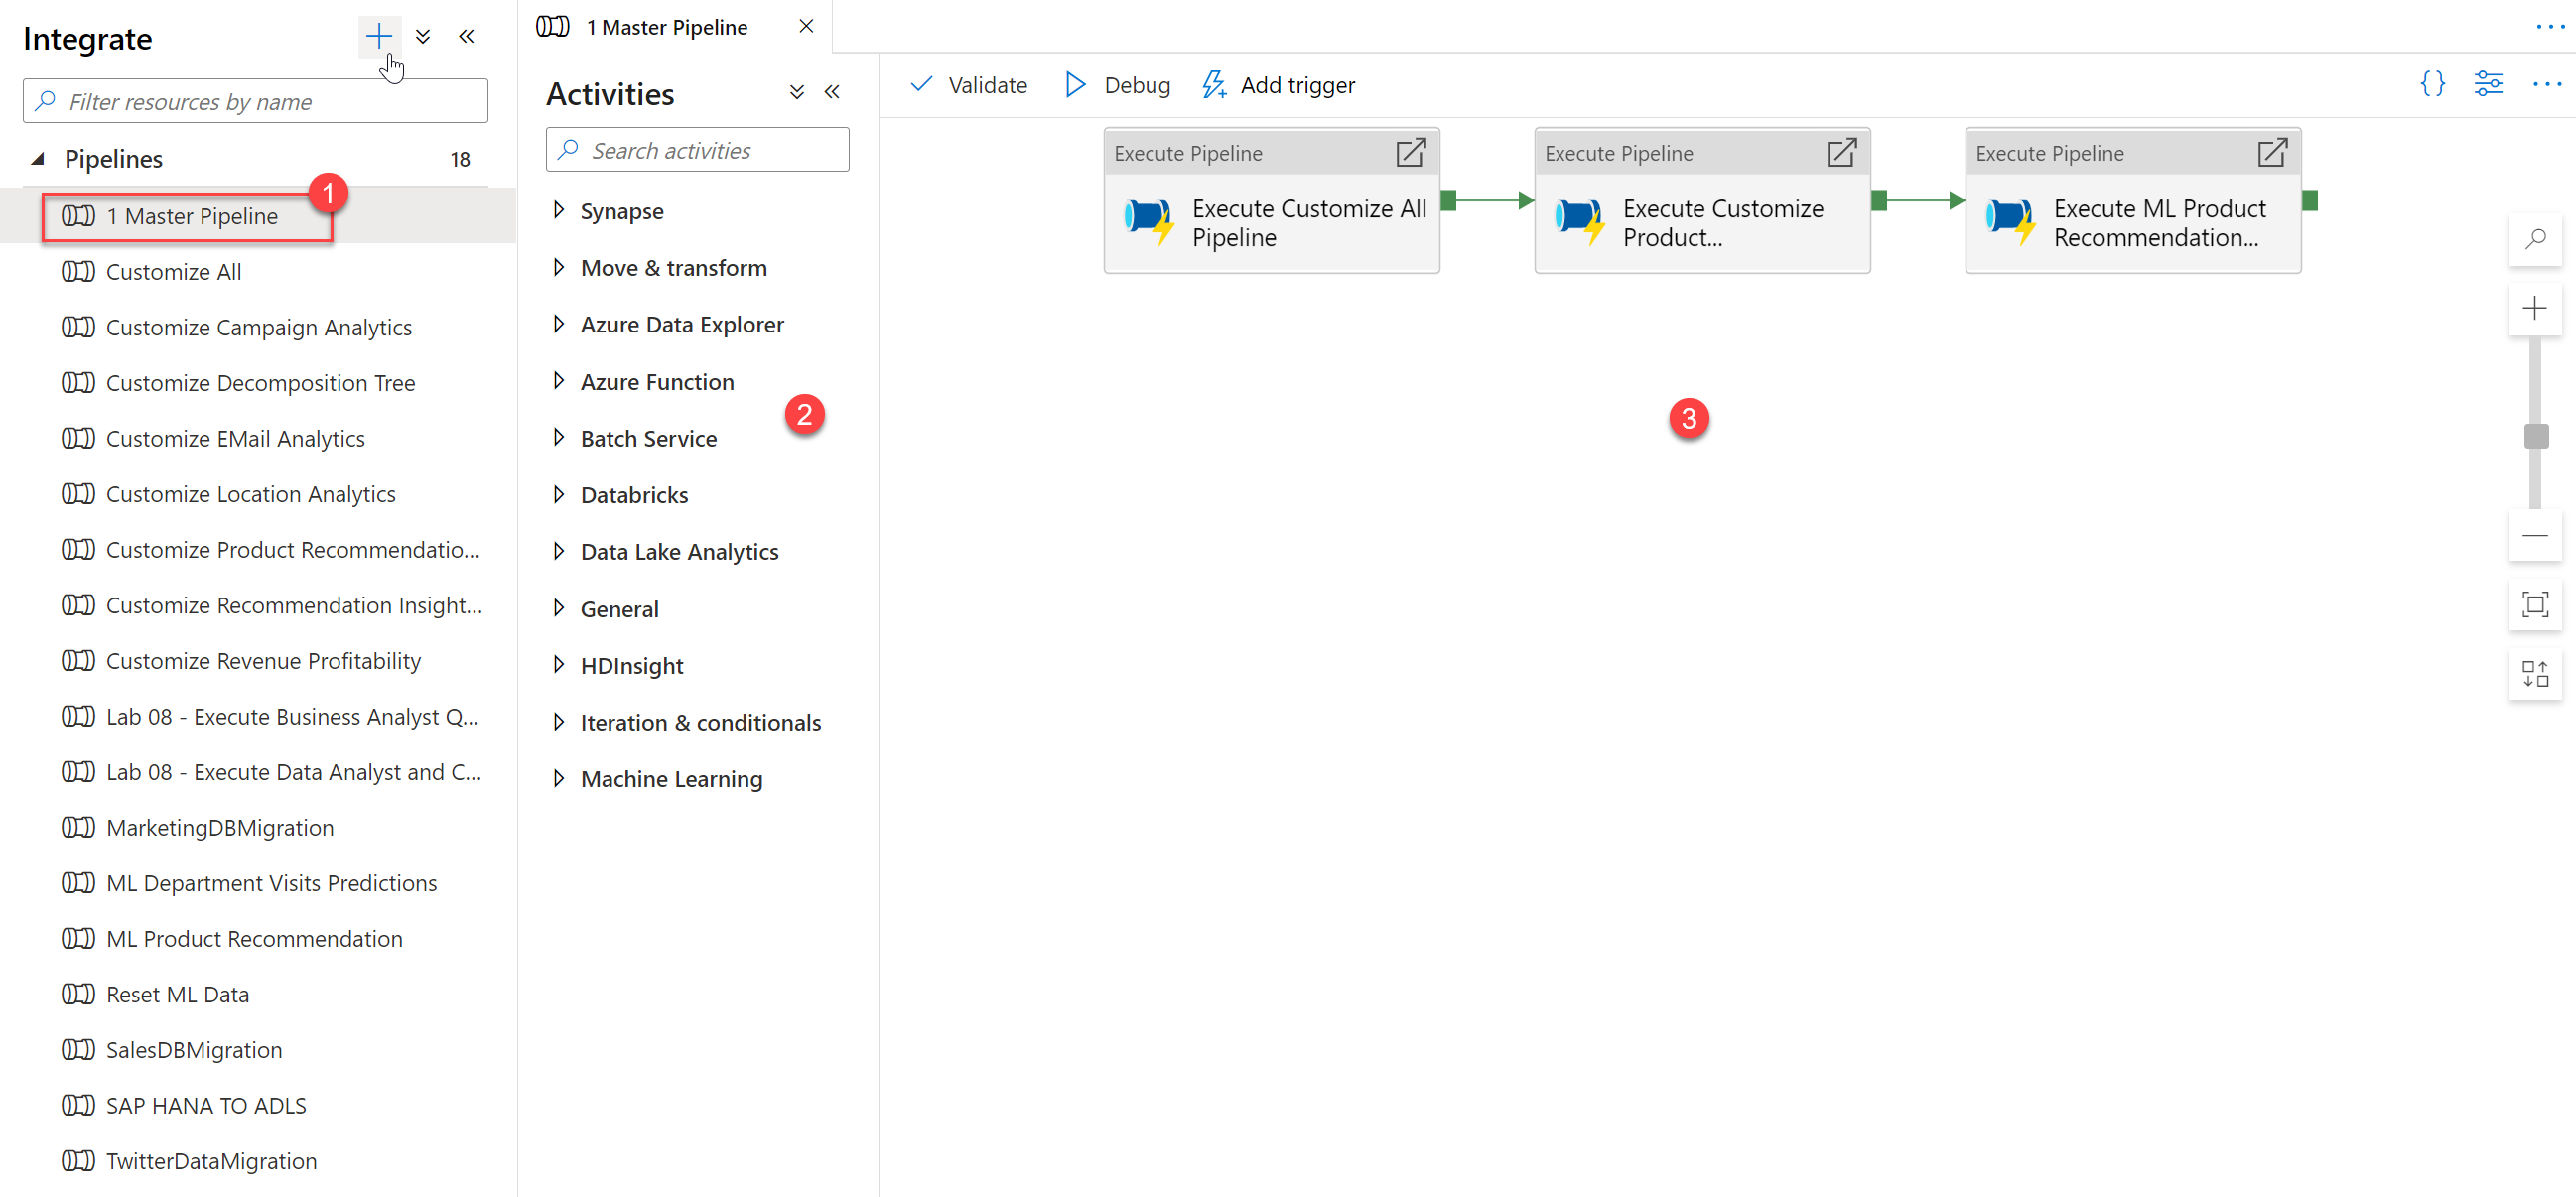 Viewing Azure Synapse pipelines list